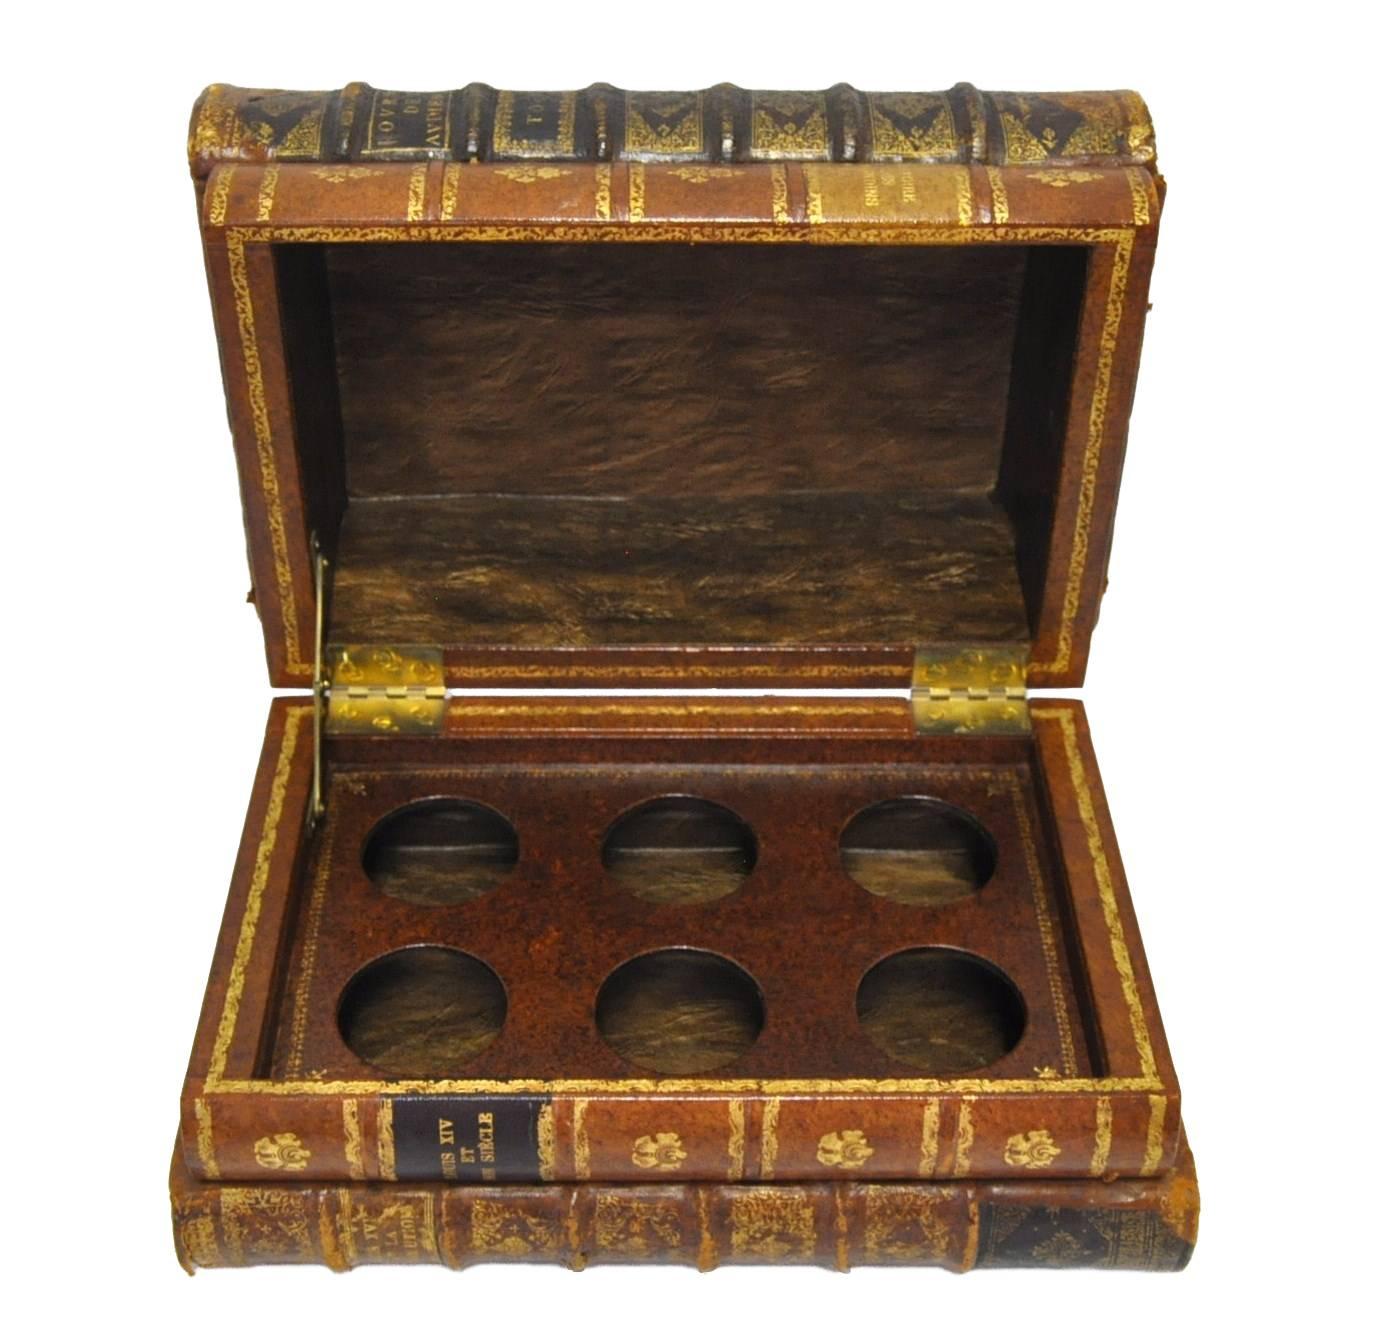 Beautiful six-liquor bottles holder box from France, circa 1870, made with four leather bound books shells. Very good condition and the books look real with the red tabs! The wood tray is removable, so the box could be used for different purpose.